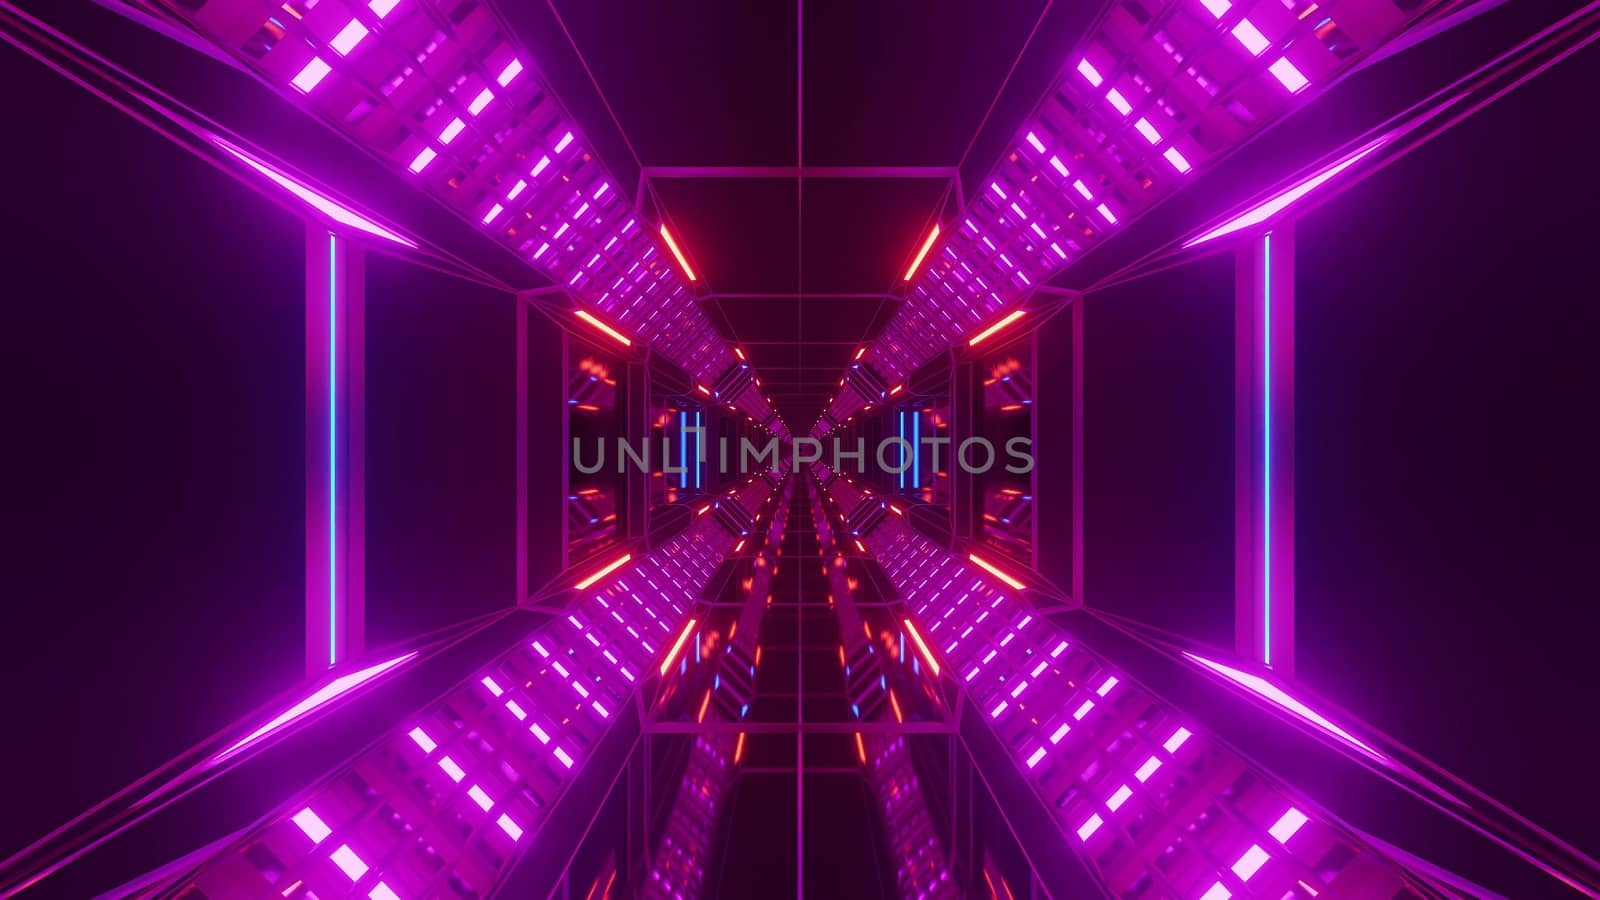 futuristic science-fiction tunnel corridor with metal steal wire-frame kontur and endless glowing lights 3d illustration background wallpaper graphic design by tunnelmotions